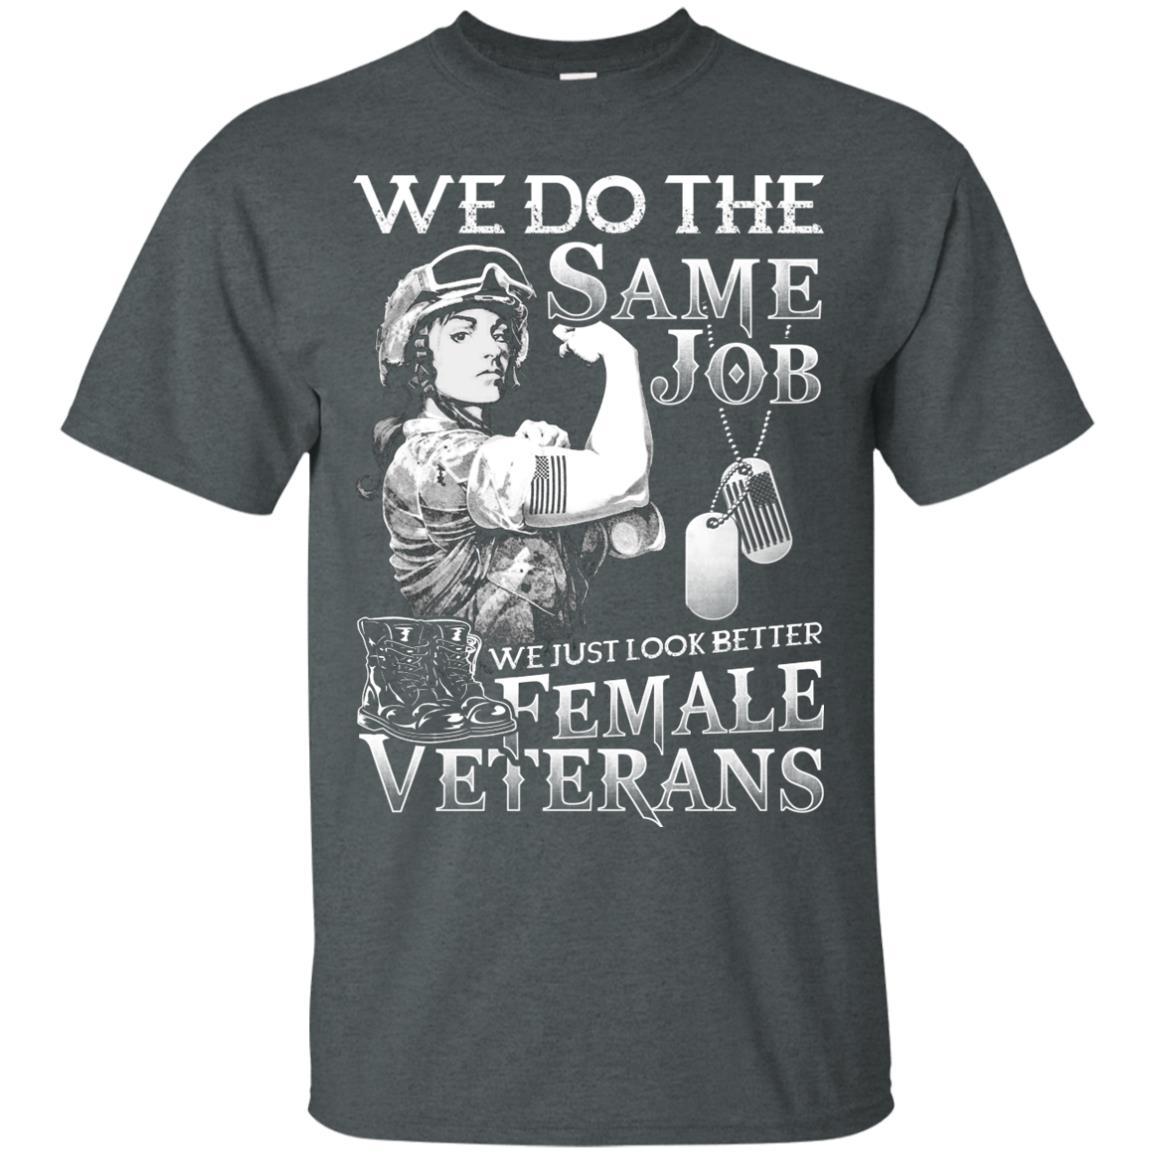 Military T-Shirt "Female Veterans We Do The Same Jobs And Look Better Women On" Front-TShirt-General-Veterans Nation